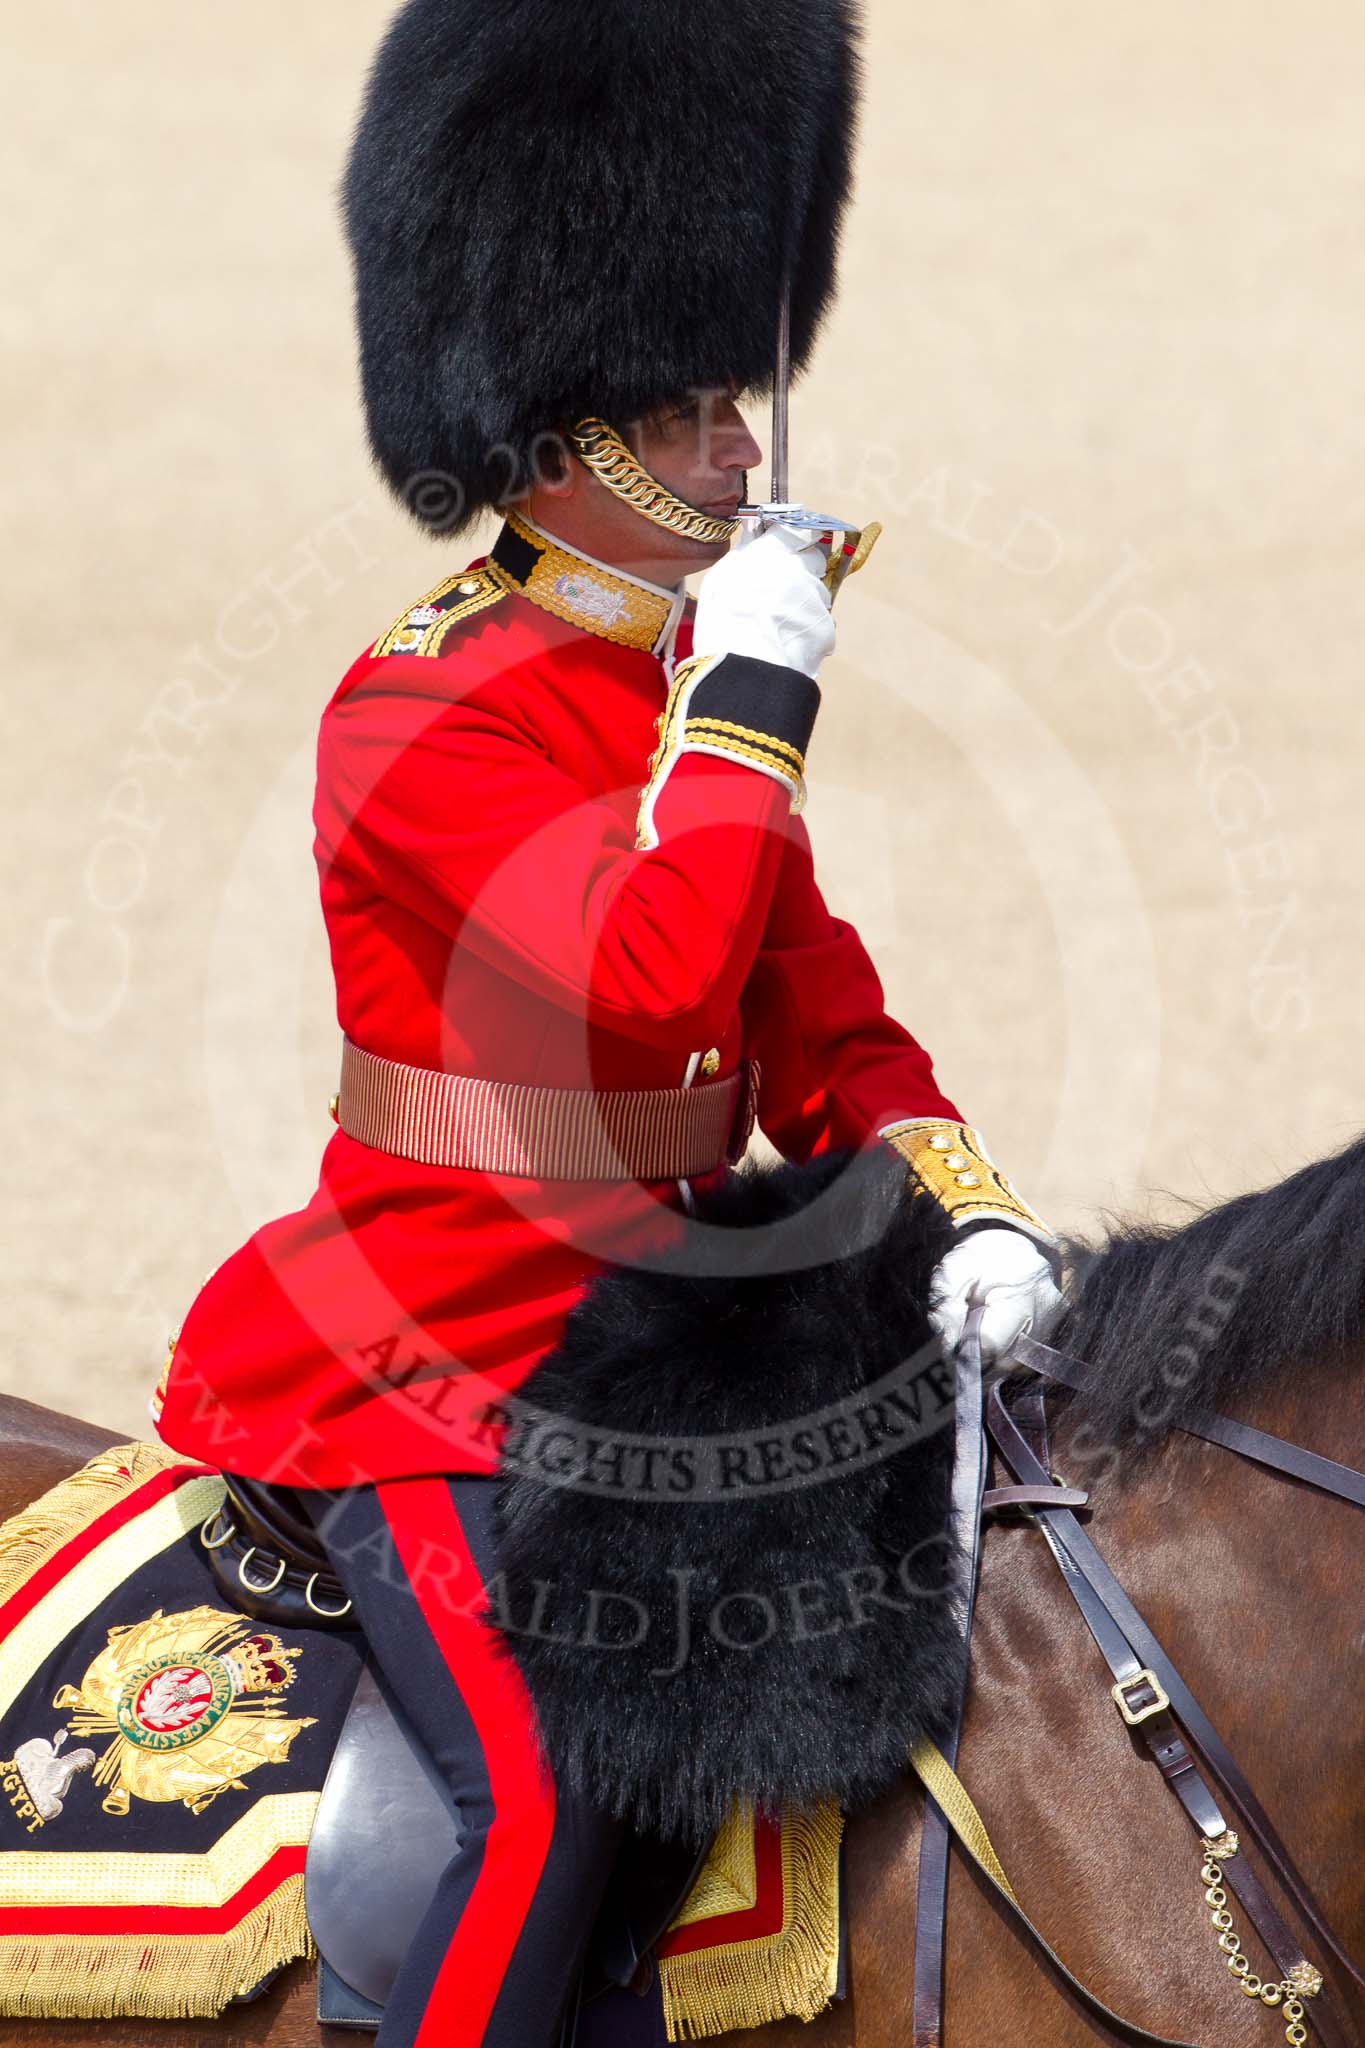 The Colonel's Review 2011: The Field Officer, Lieutenant Colonel L P M Jopp, has got permission to march off..
Horse Guards Parade, Westminster,
London SW1,

United Kingdom,
on 04 June 2011 at 12:05, image #282